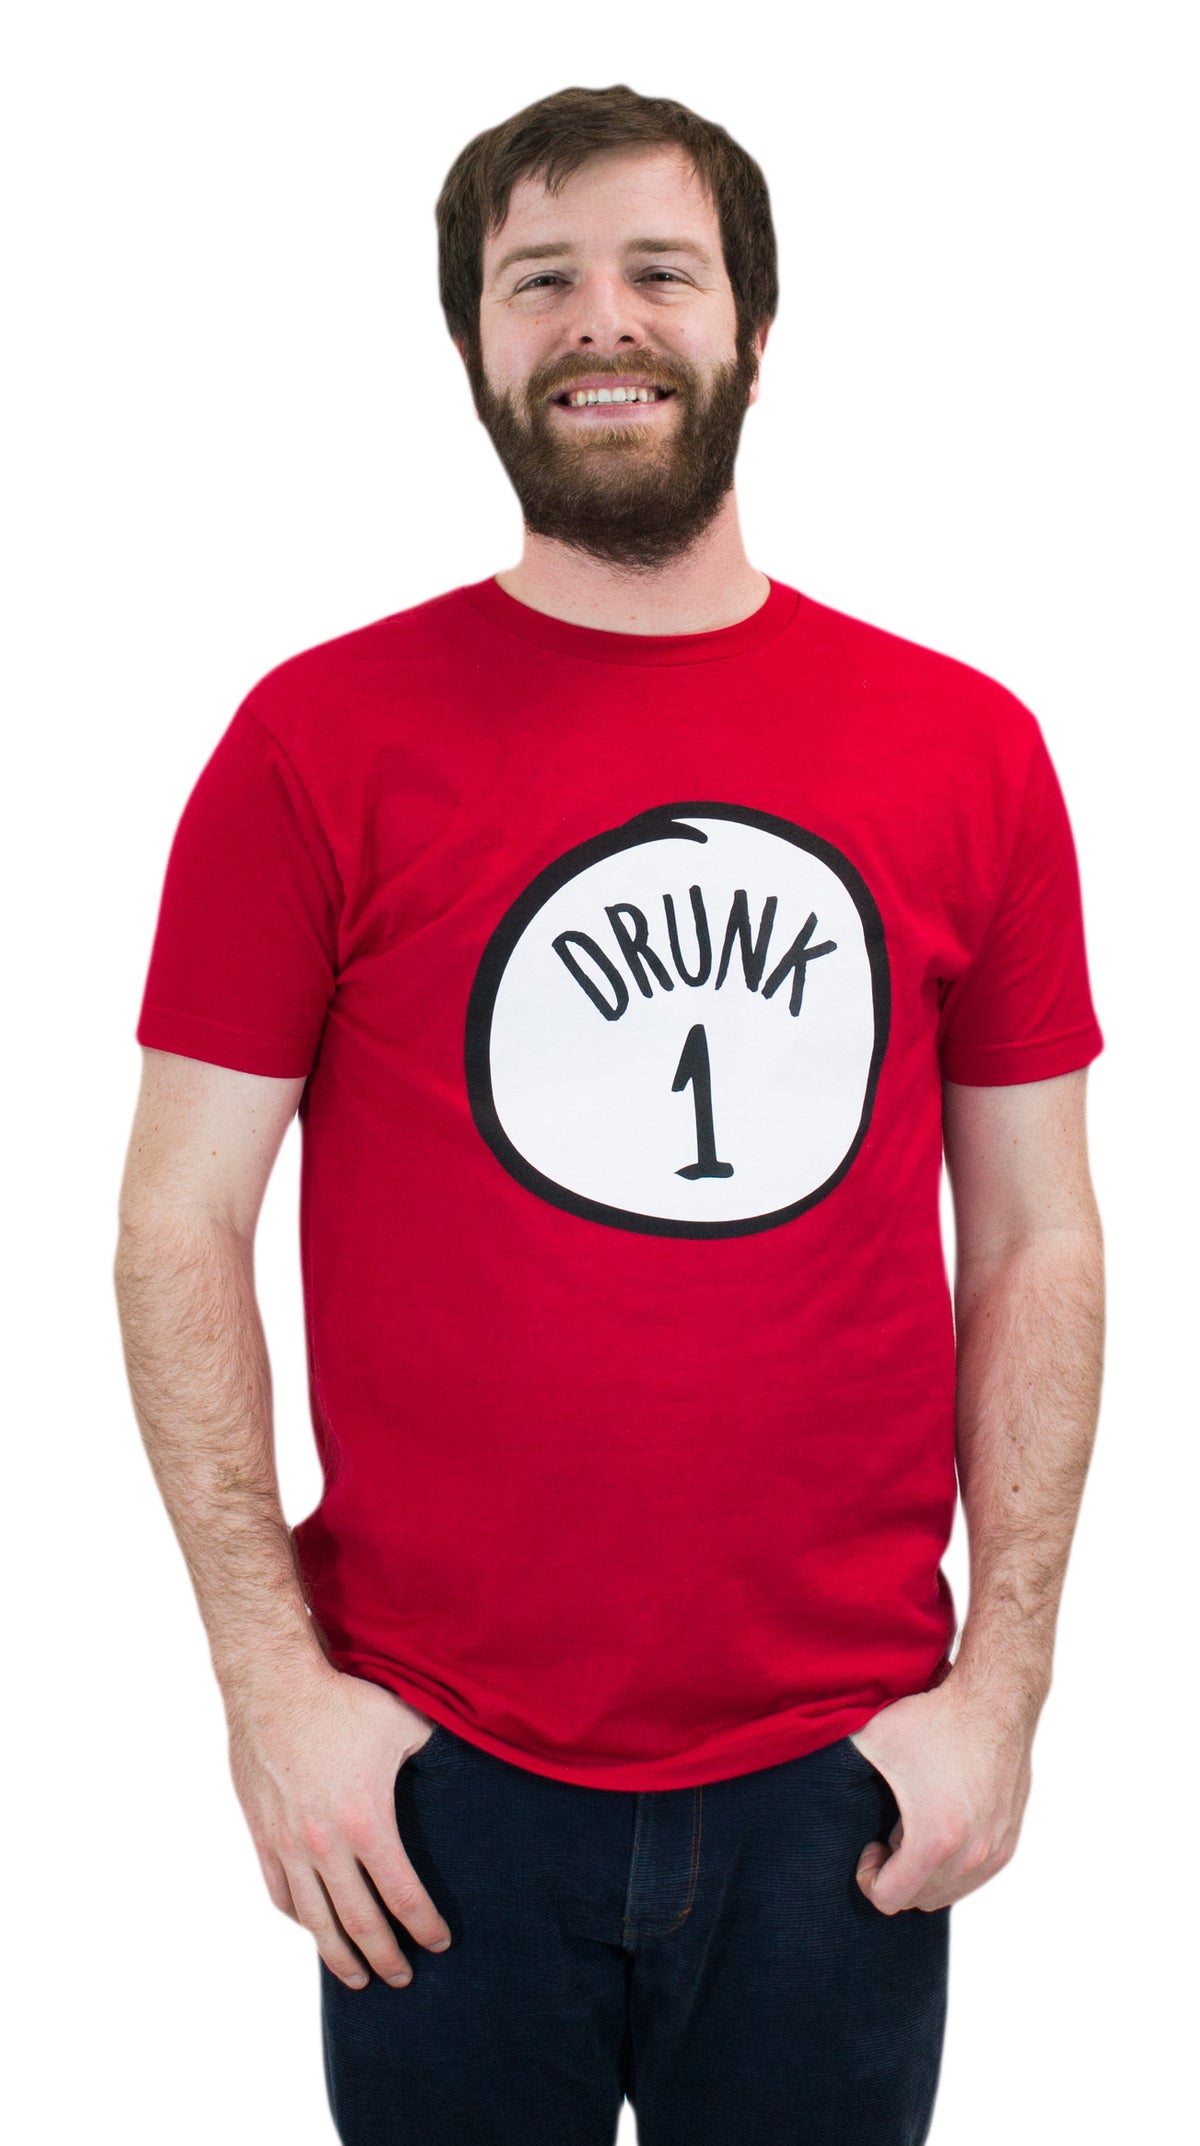 Drunk 1 | Funny Drinking Team, Group Halloween Costume Unisex T-shirt-Adult, S